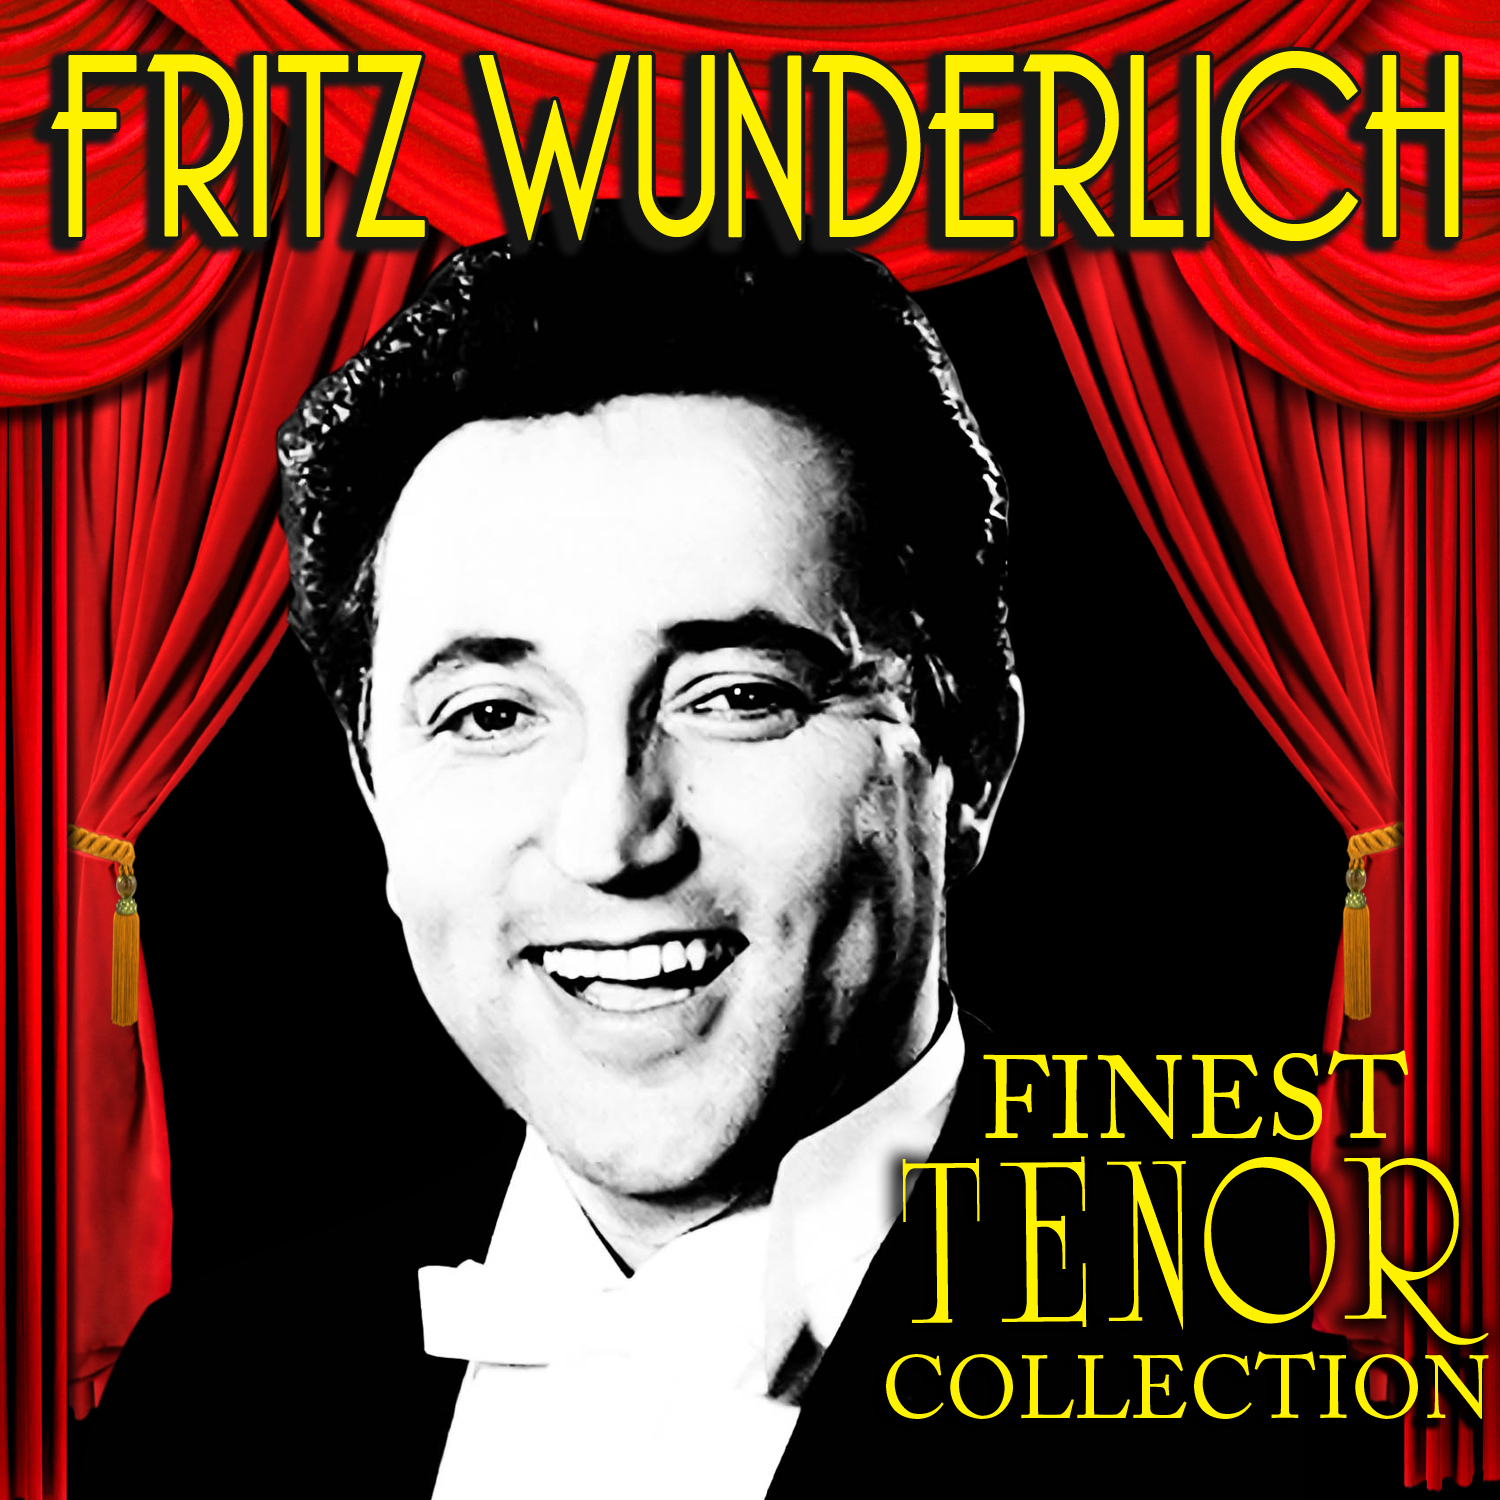 Finest Tenor Collection